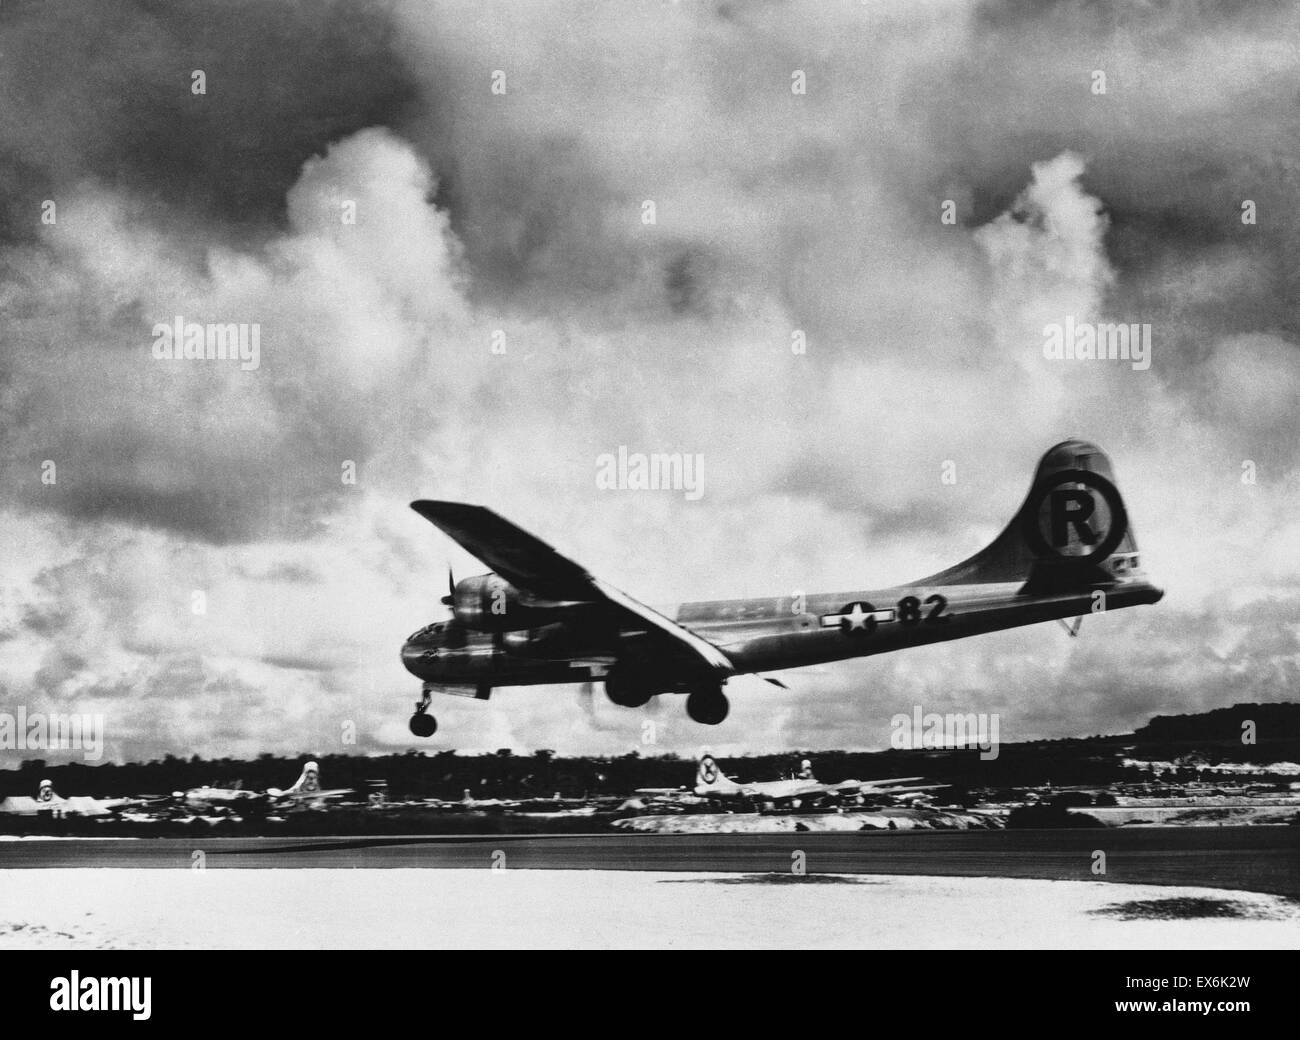 The Enola Gay, Boeing B-29 Superfortress bomber, named for Enola Gay Tibbets, the mother of the pilot, Colonel Paul Tibbets, On 6 August 1945, during the final stages of World War II, it became the first aircraft to drop an atomic bomb. The bomb, was targ Stock Photo